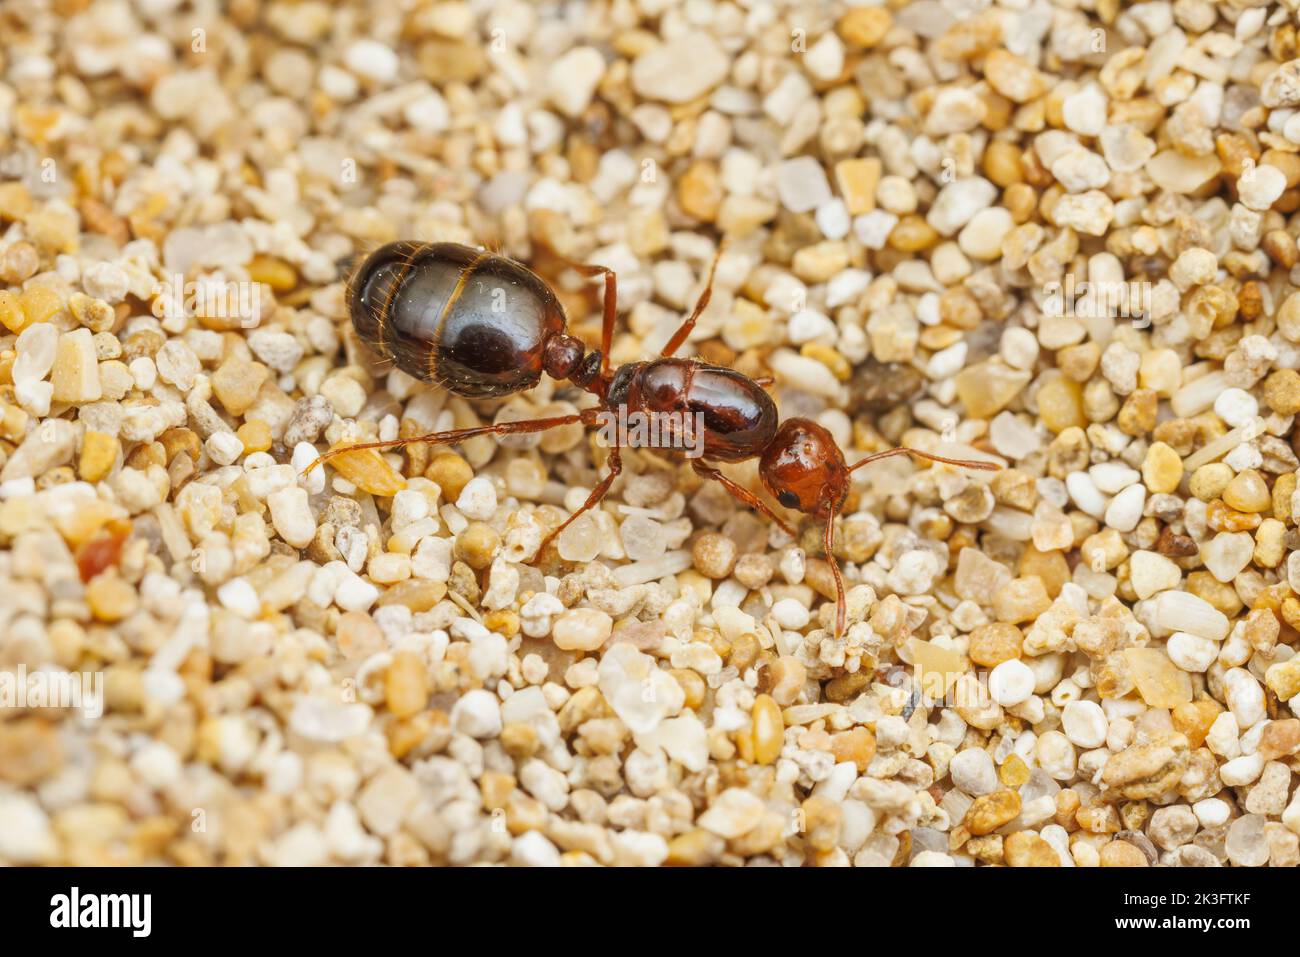 Red Imported Fire Ant (Solenopsis invicta) - Queen Stock Photo